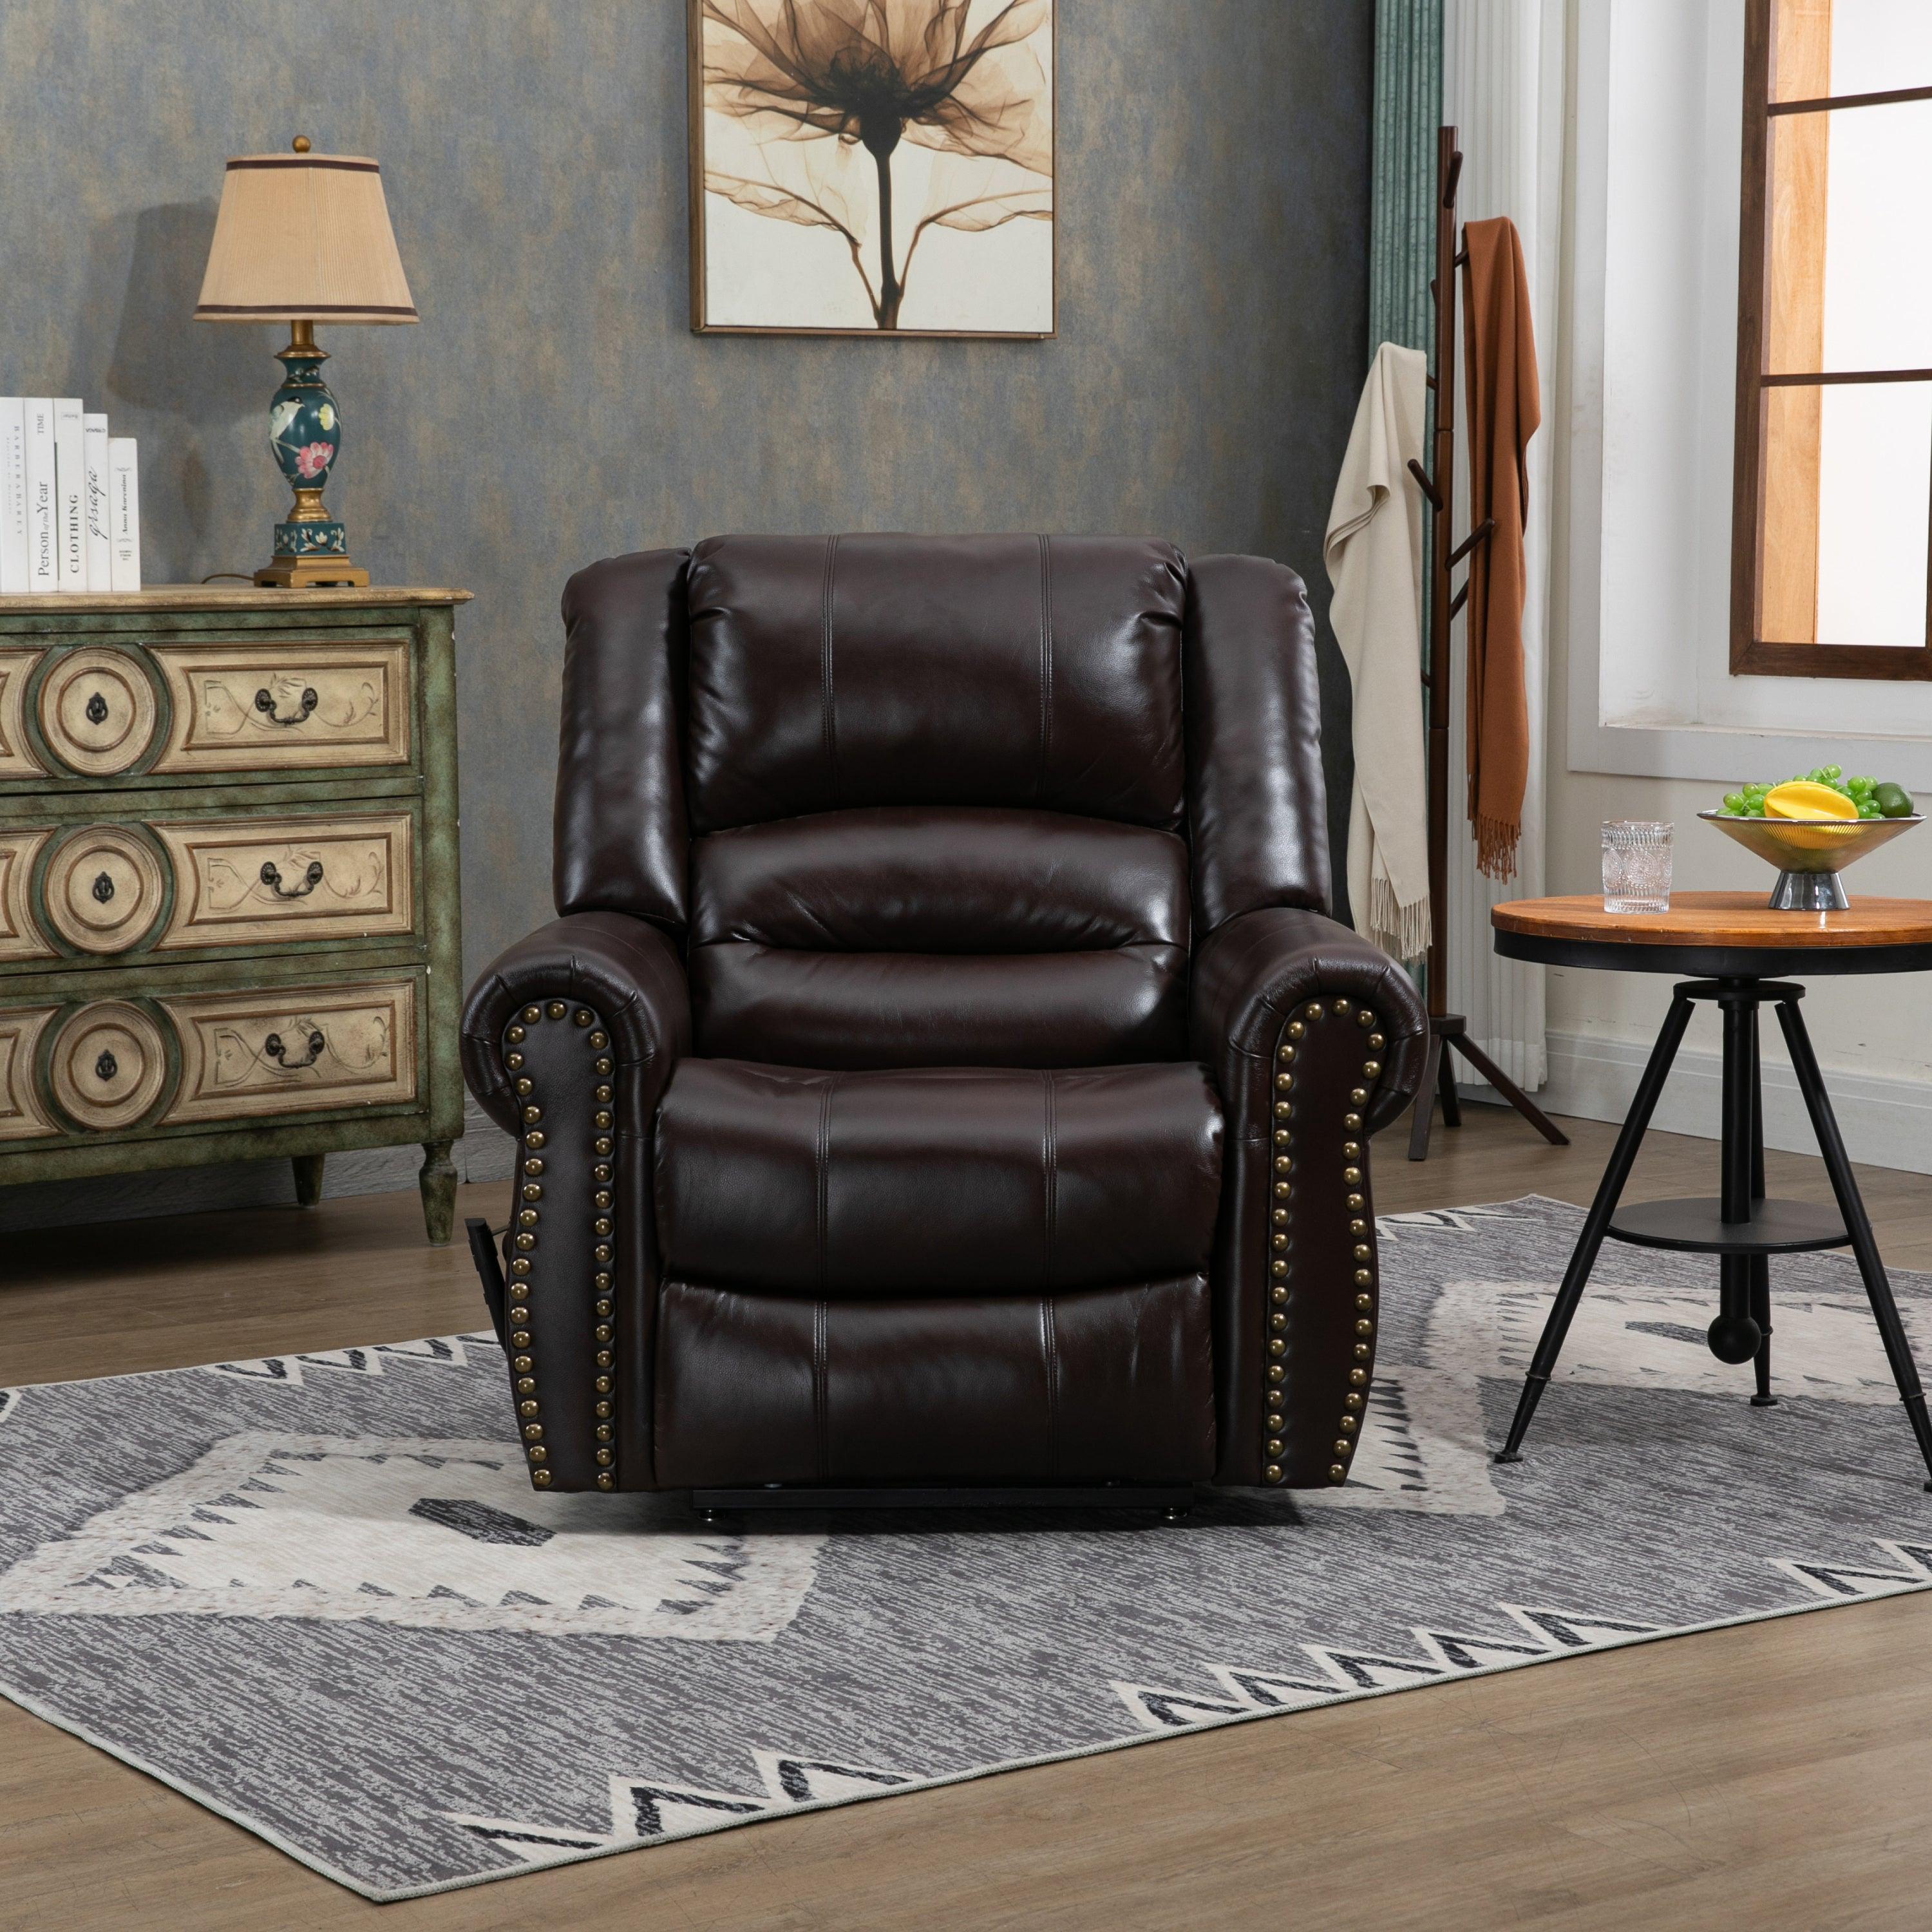 🆓🚛 Power Lift Recliner Chair Heat Massage Dual Motor Infinite Position Up To 350 Lbs, Faux Leather, Heavy Duty Motion Mechanism With Usb Ports, Brown